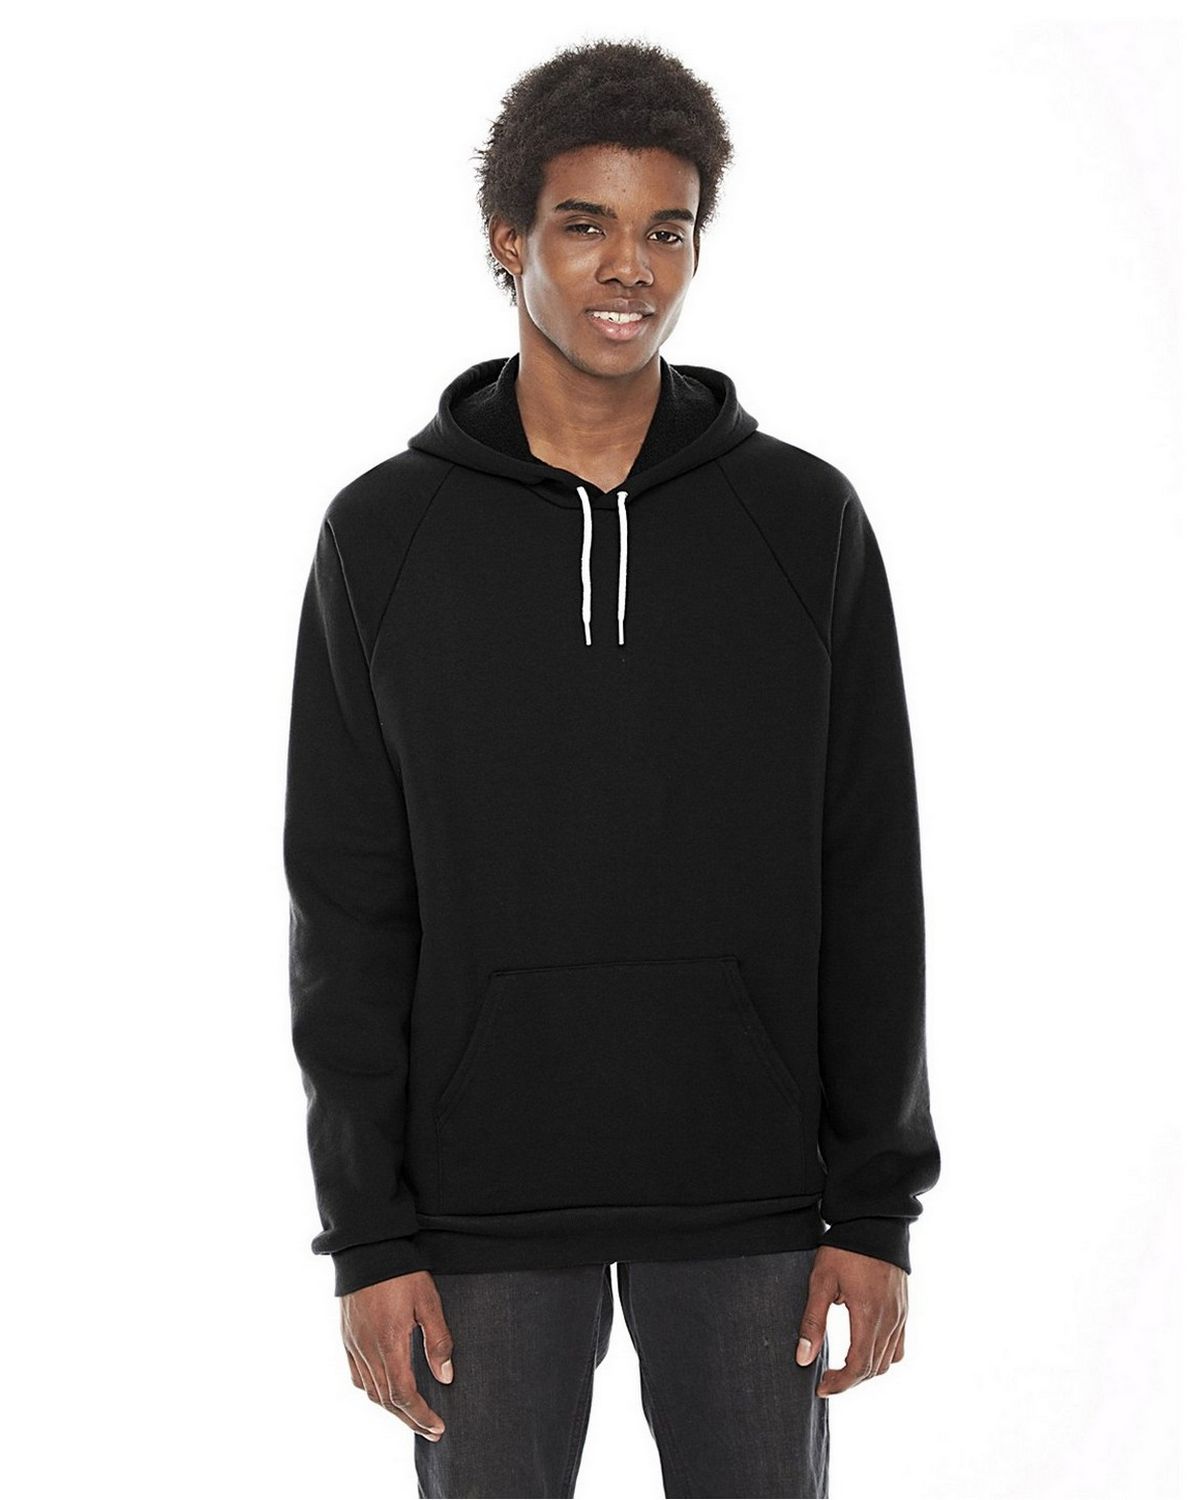 American Apparel HVT495 Unisex Classic Pullover Hoodie